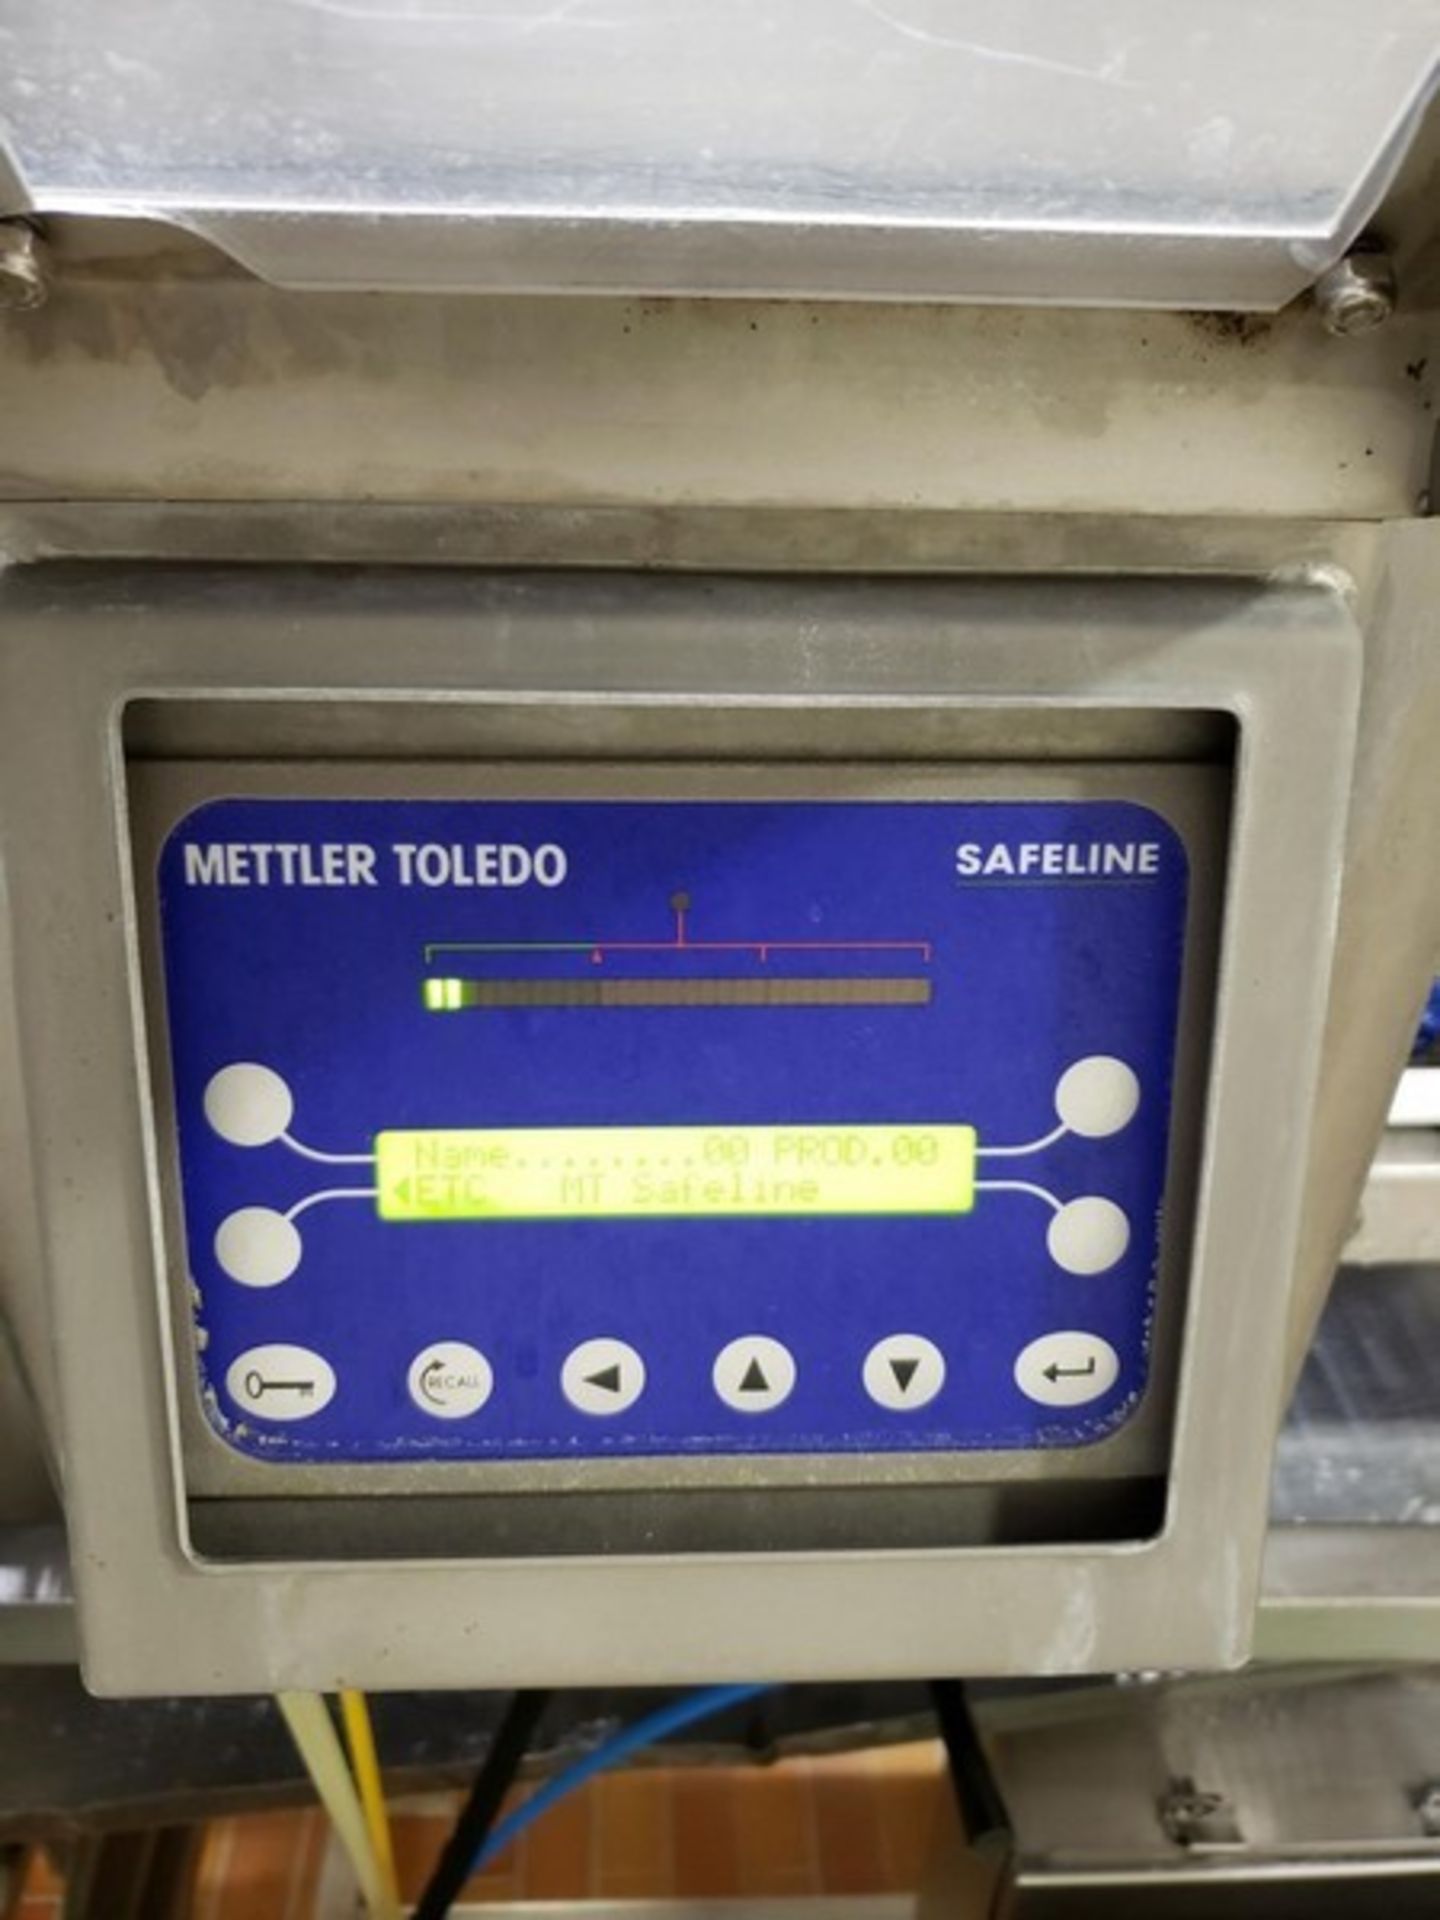 Safeline Mettler Toledo 3 x 40 S/S Sanitary Metal Detector, System was last used in a Tyson plant on - Image 20 of 22